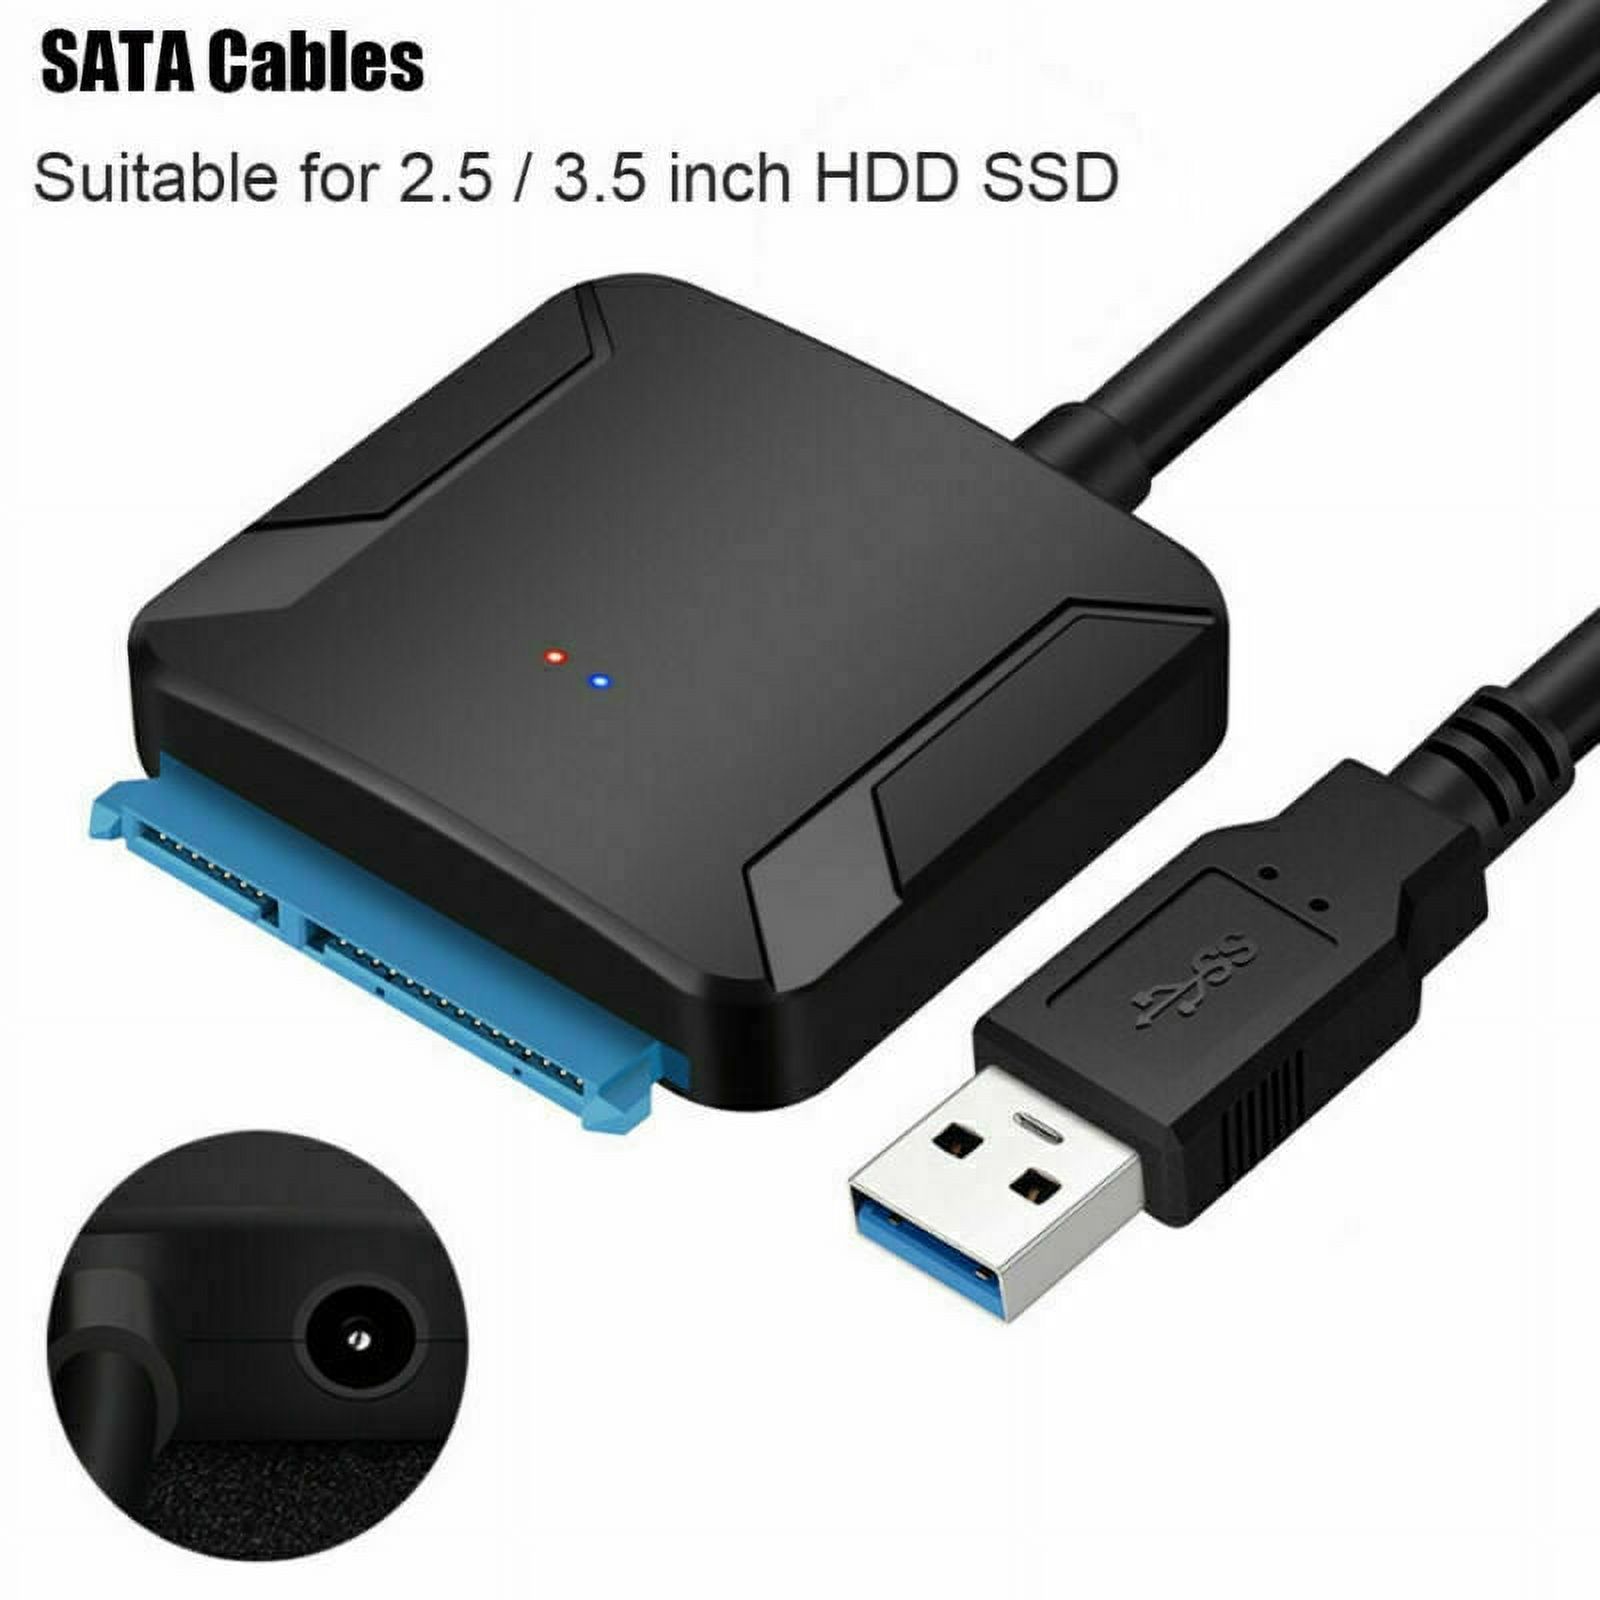 SATA to USB 3.0 Cable, USB 3.0 to SATA III Hard Drive Adapter Compatible for 2.5 3.5 Inch HDD/SSD Hard Drive Disk, Support UASP - image 1 of 8